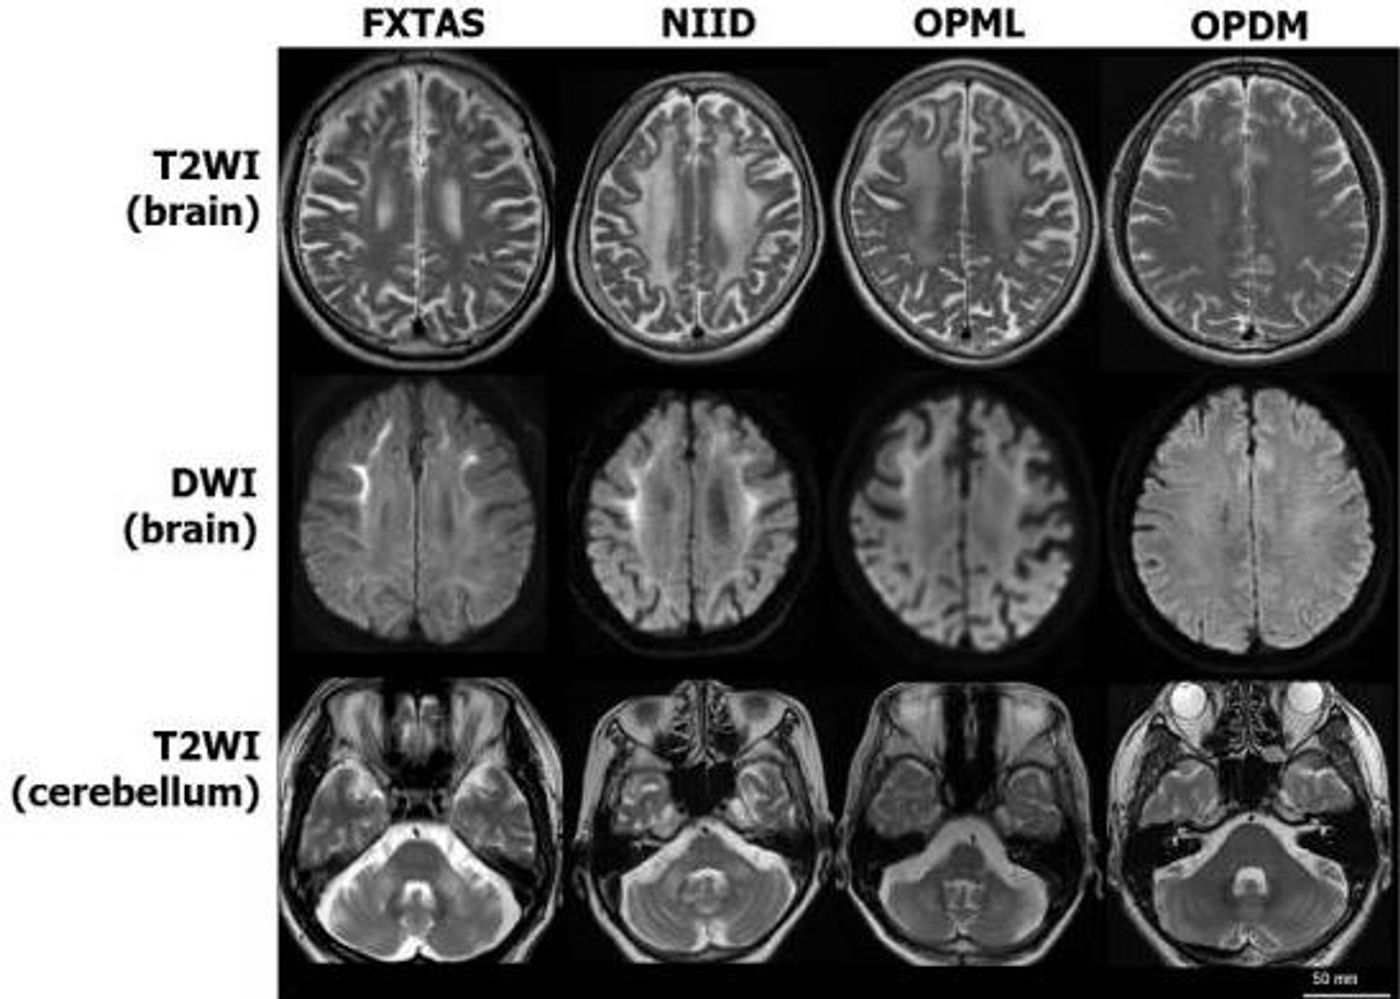 4 rare diseases characterized by similar neurodegenerative symptoms. Patients with fragile X tremor/ataxia syndrome (FXTAS), neuronal intranuclear inclusion disease (NIID) and oculopharyngeal myopathy with leukoencephalopathy (OPML) have similar brain MRIs. Patients with oculopharyngodistal myopathy (OPDM) have normal brain scans but muscle tissue that's similar to OPML patients